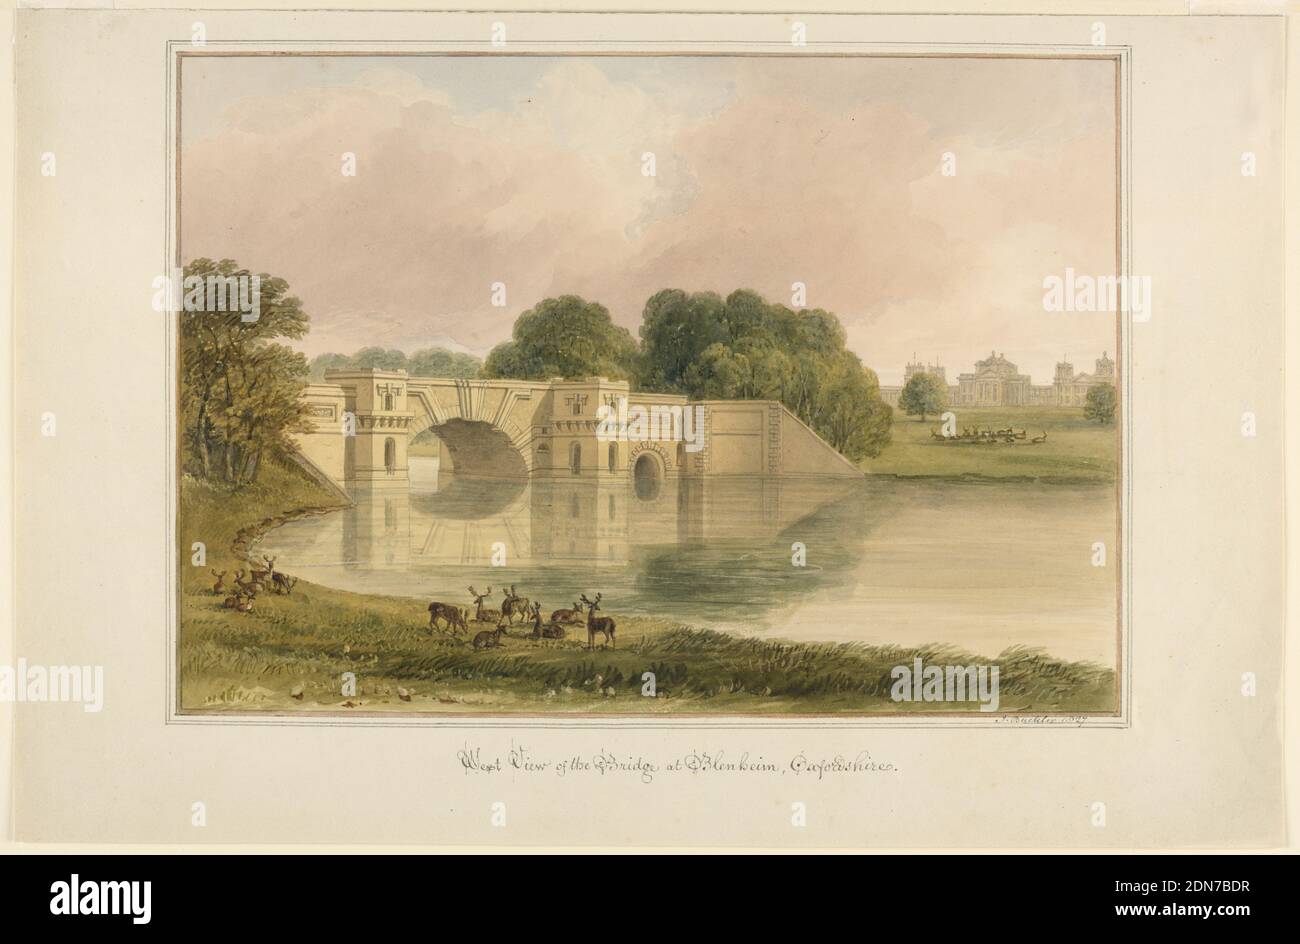 West View of Bridge at Blenheim, Oxfordshire, John Buckler, F.S.A., British, 1770 – 1851, Graphite, pen and brown ink, brush and watercolor, View of the lake and bridge at left with the castle in the distance at right. A herd of deer is shown in the foreground., England, 1827, architecture, Drawing Stock Photo